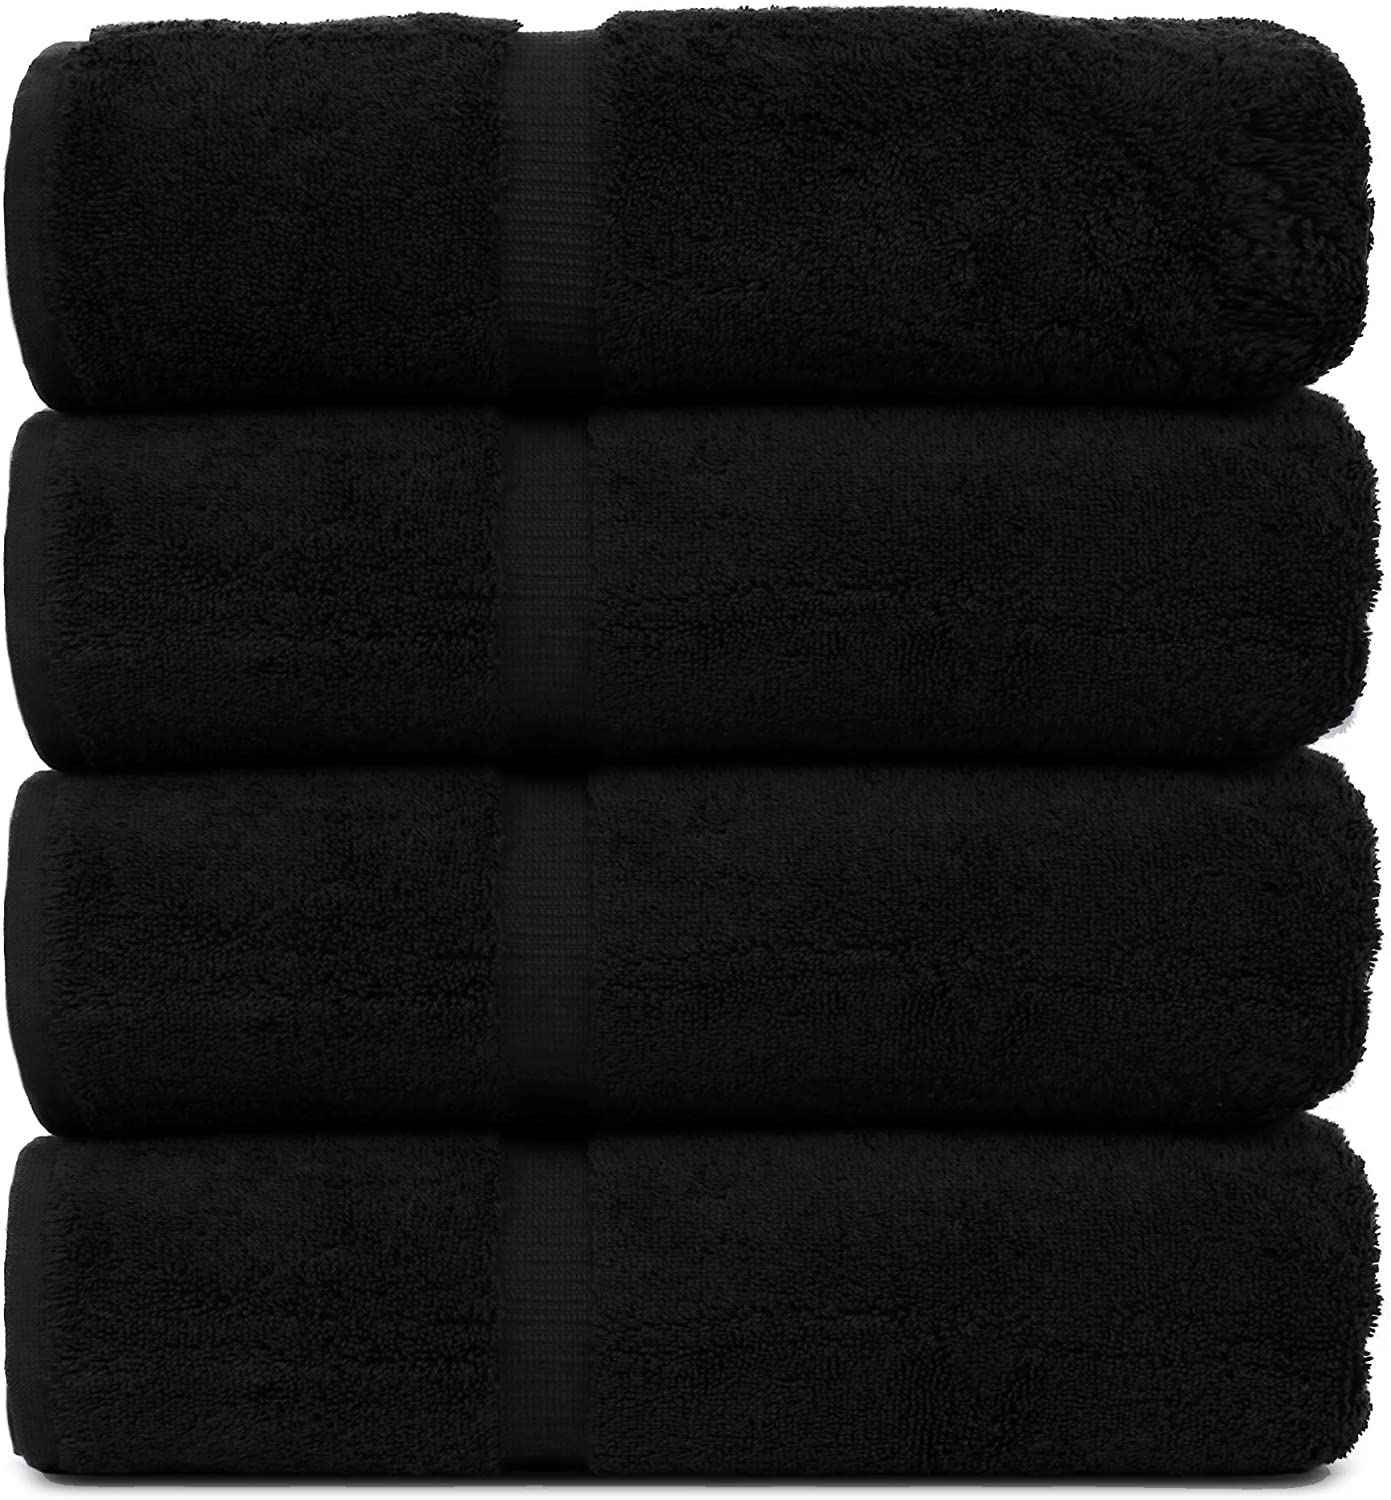 Authentic Hotel and Spa Turkish Cotton Bath Towel in Dark Grey (Set of 4)  (As Is Item) - Bed Bath & Beyond - 30587511